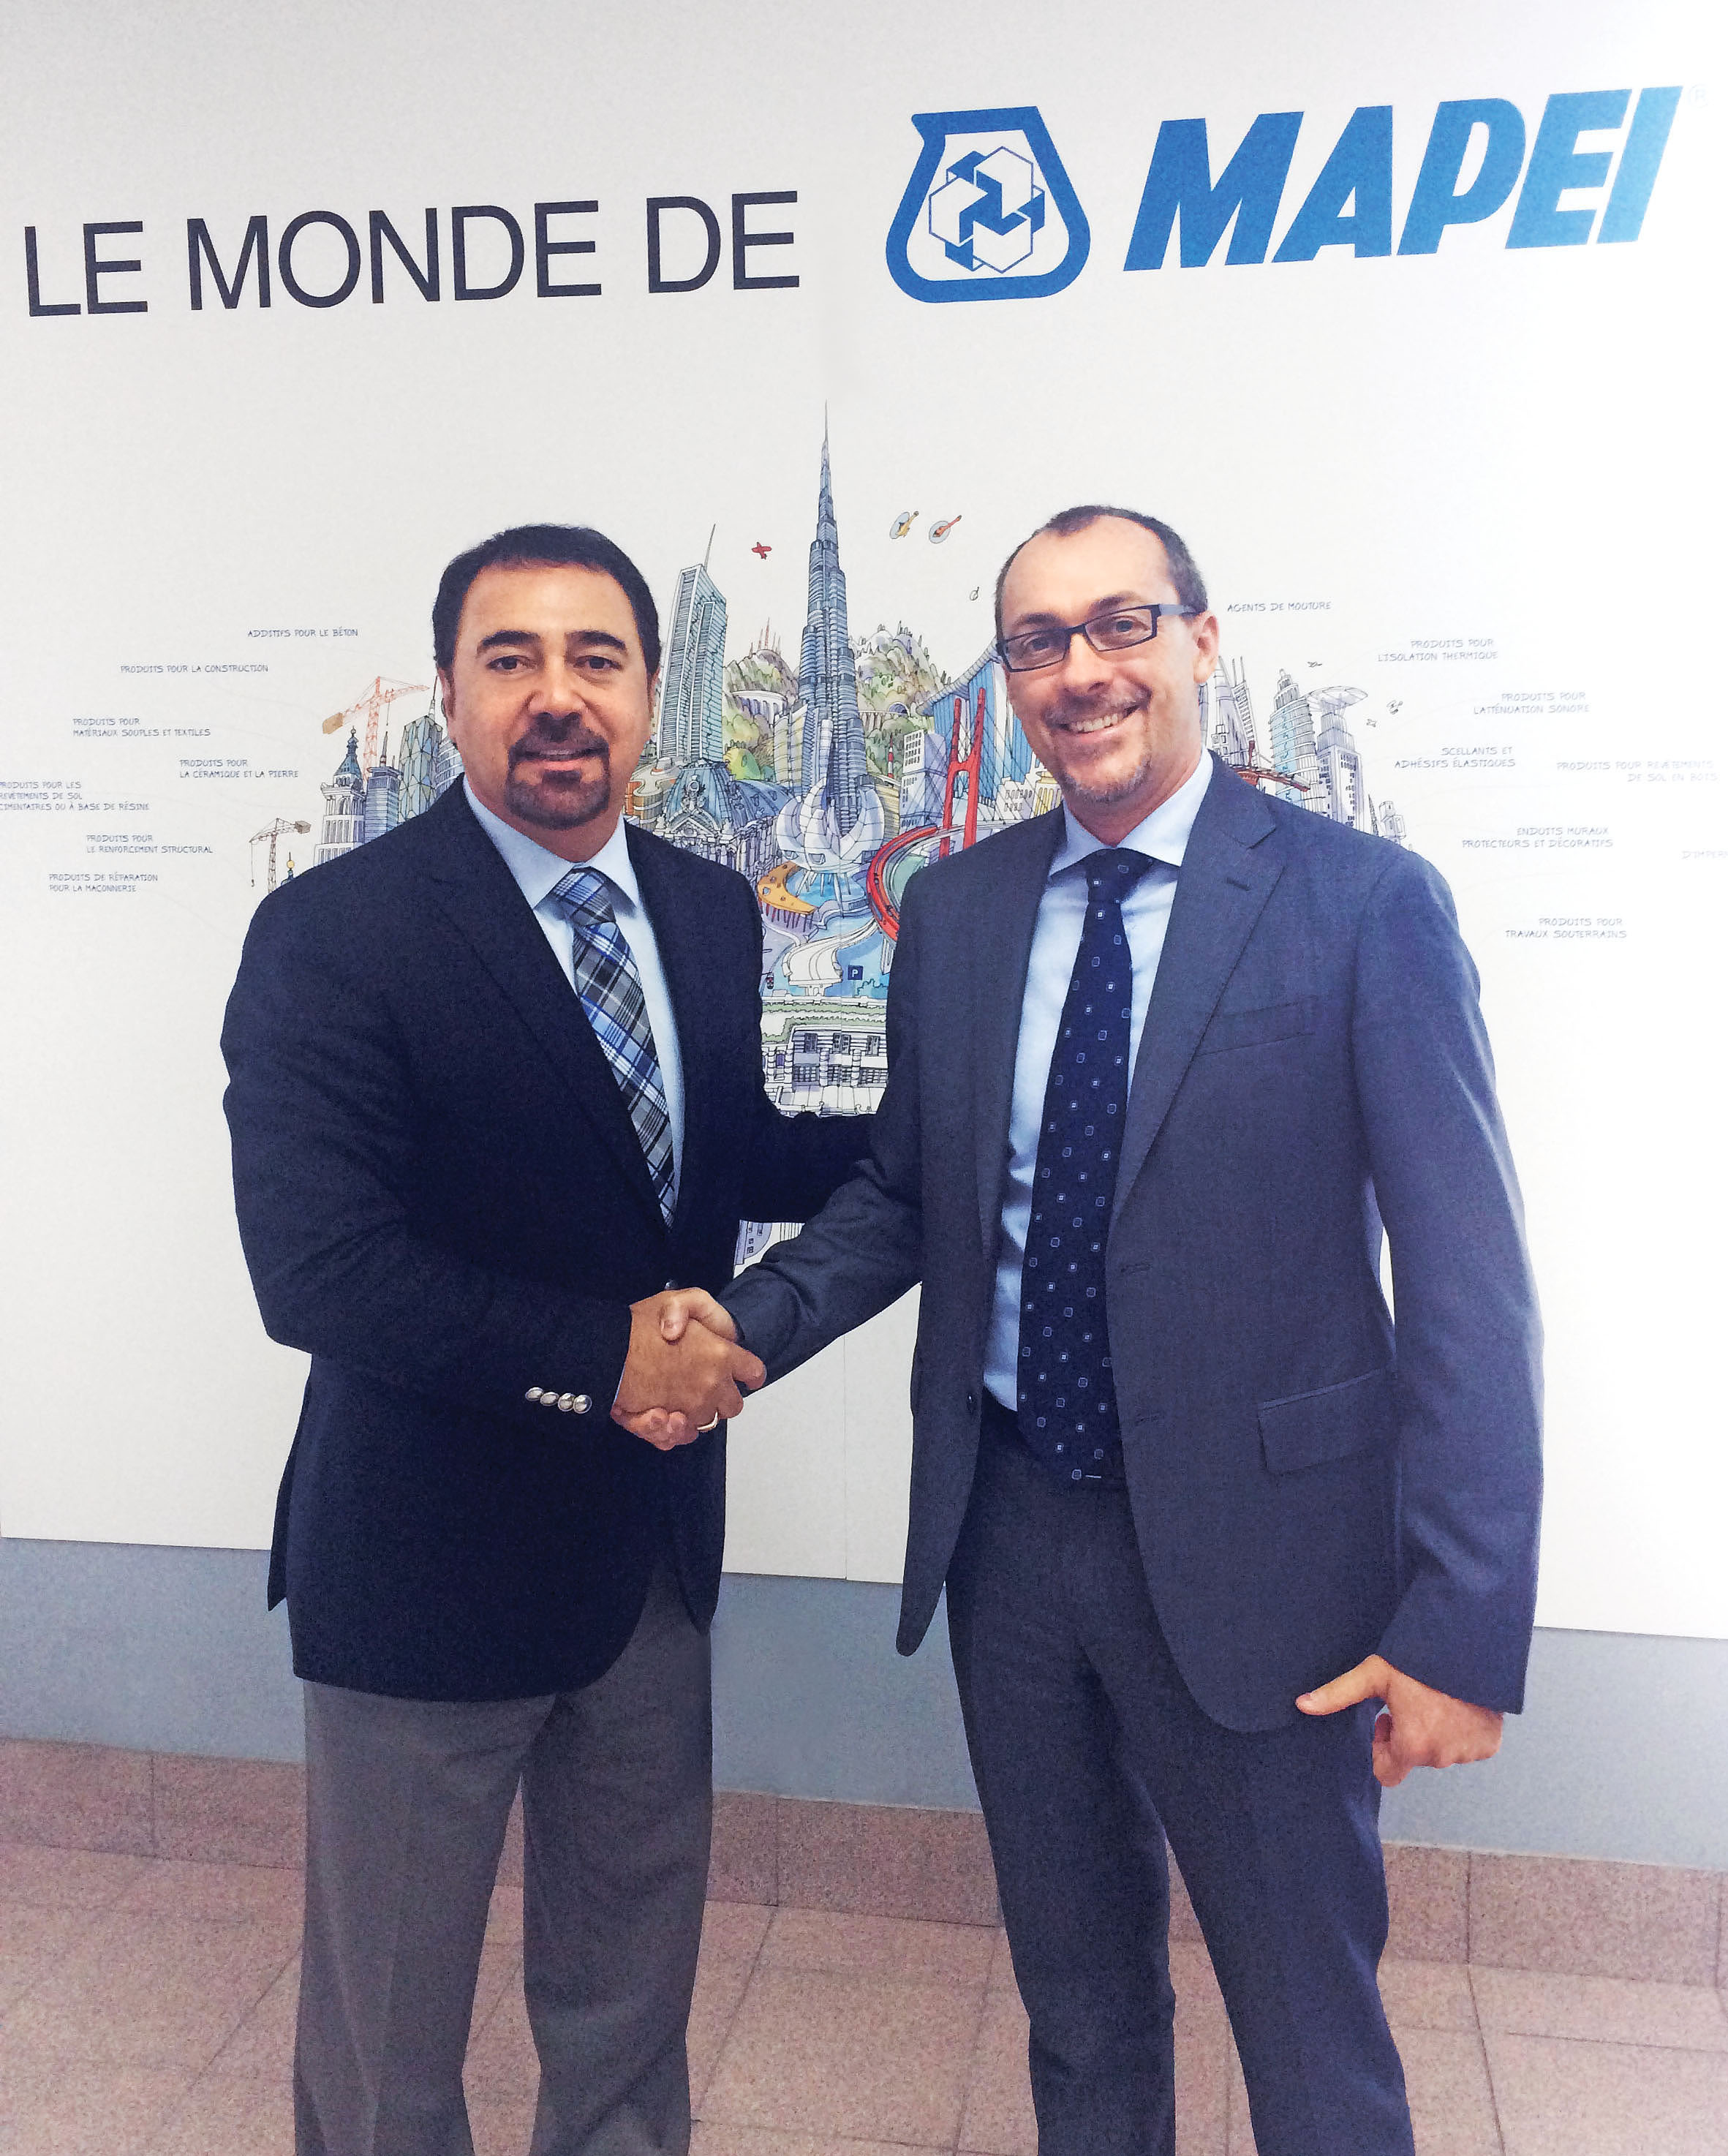 Mapei has announced the appointment of Marco Roma as General Manager of MAPEI Inc., the Canadian subsidiary of the global chemical products manufacturer. Roma will join the MAPEI Americas leadership team and will report directly to Mapei Americas President and CEO Luigi Di Geso.